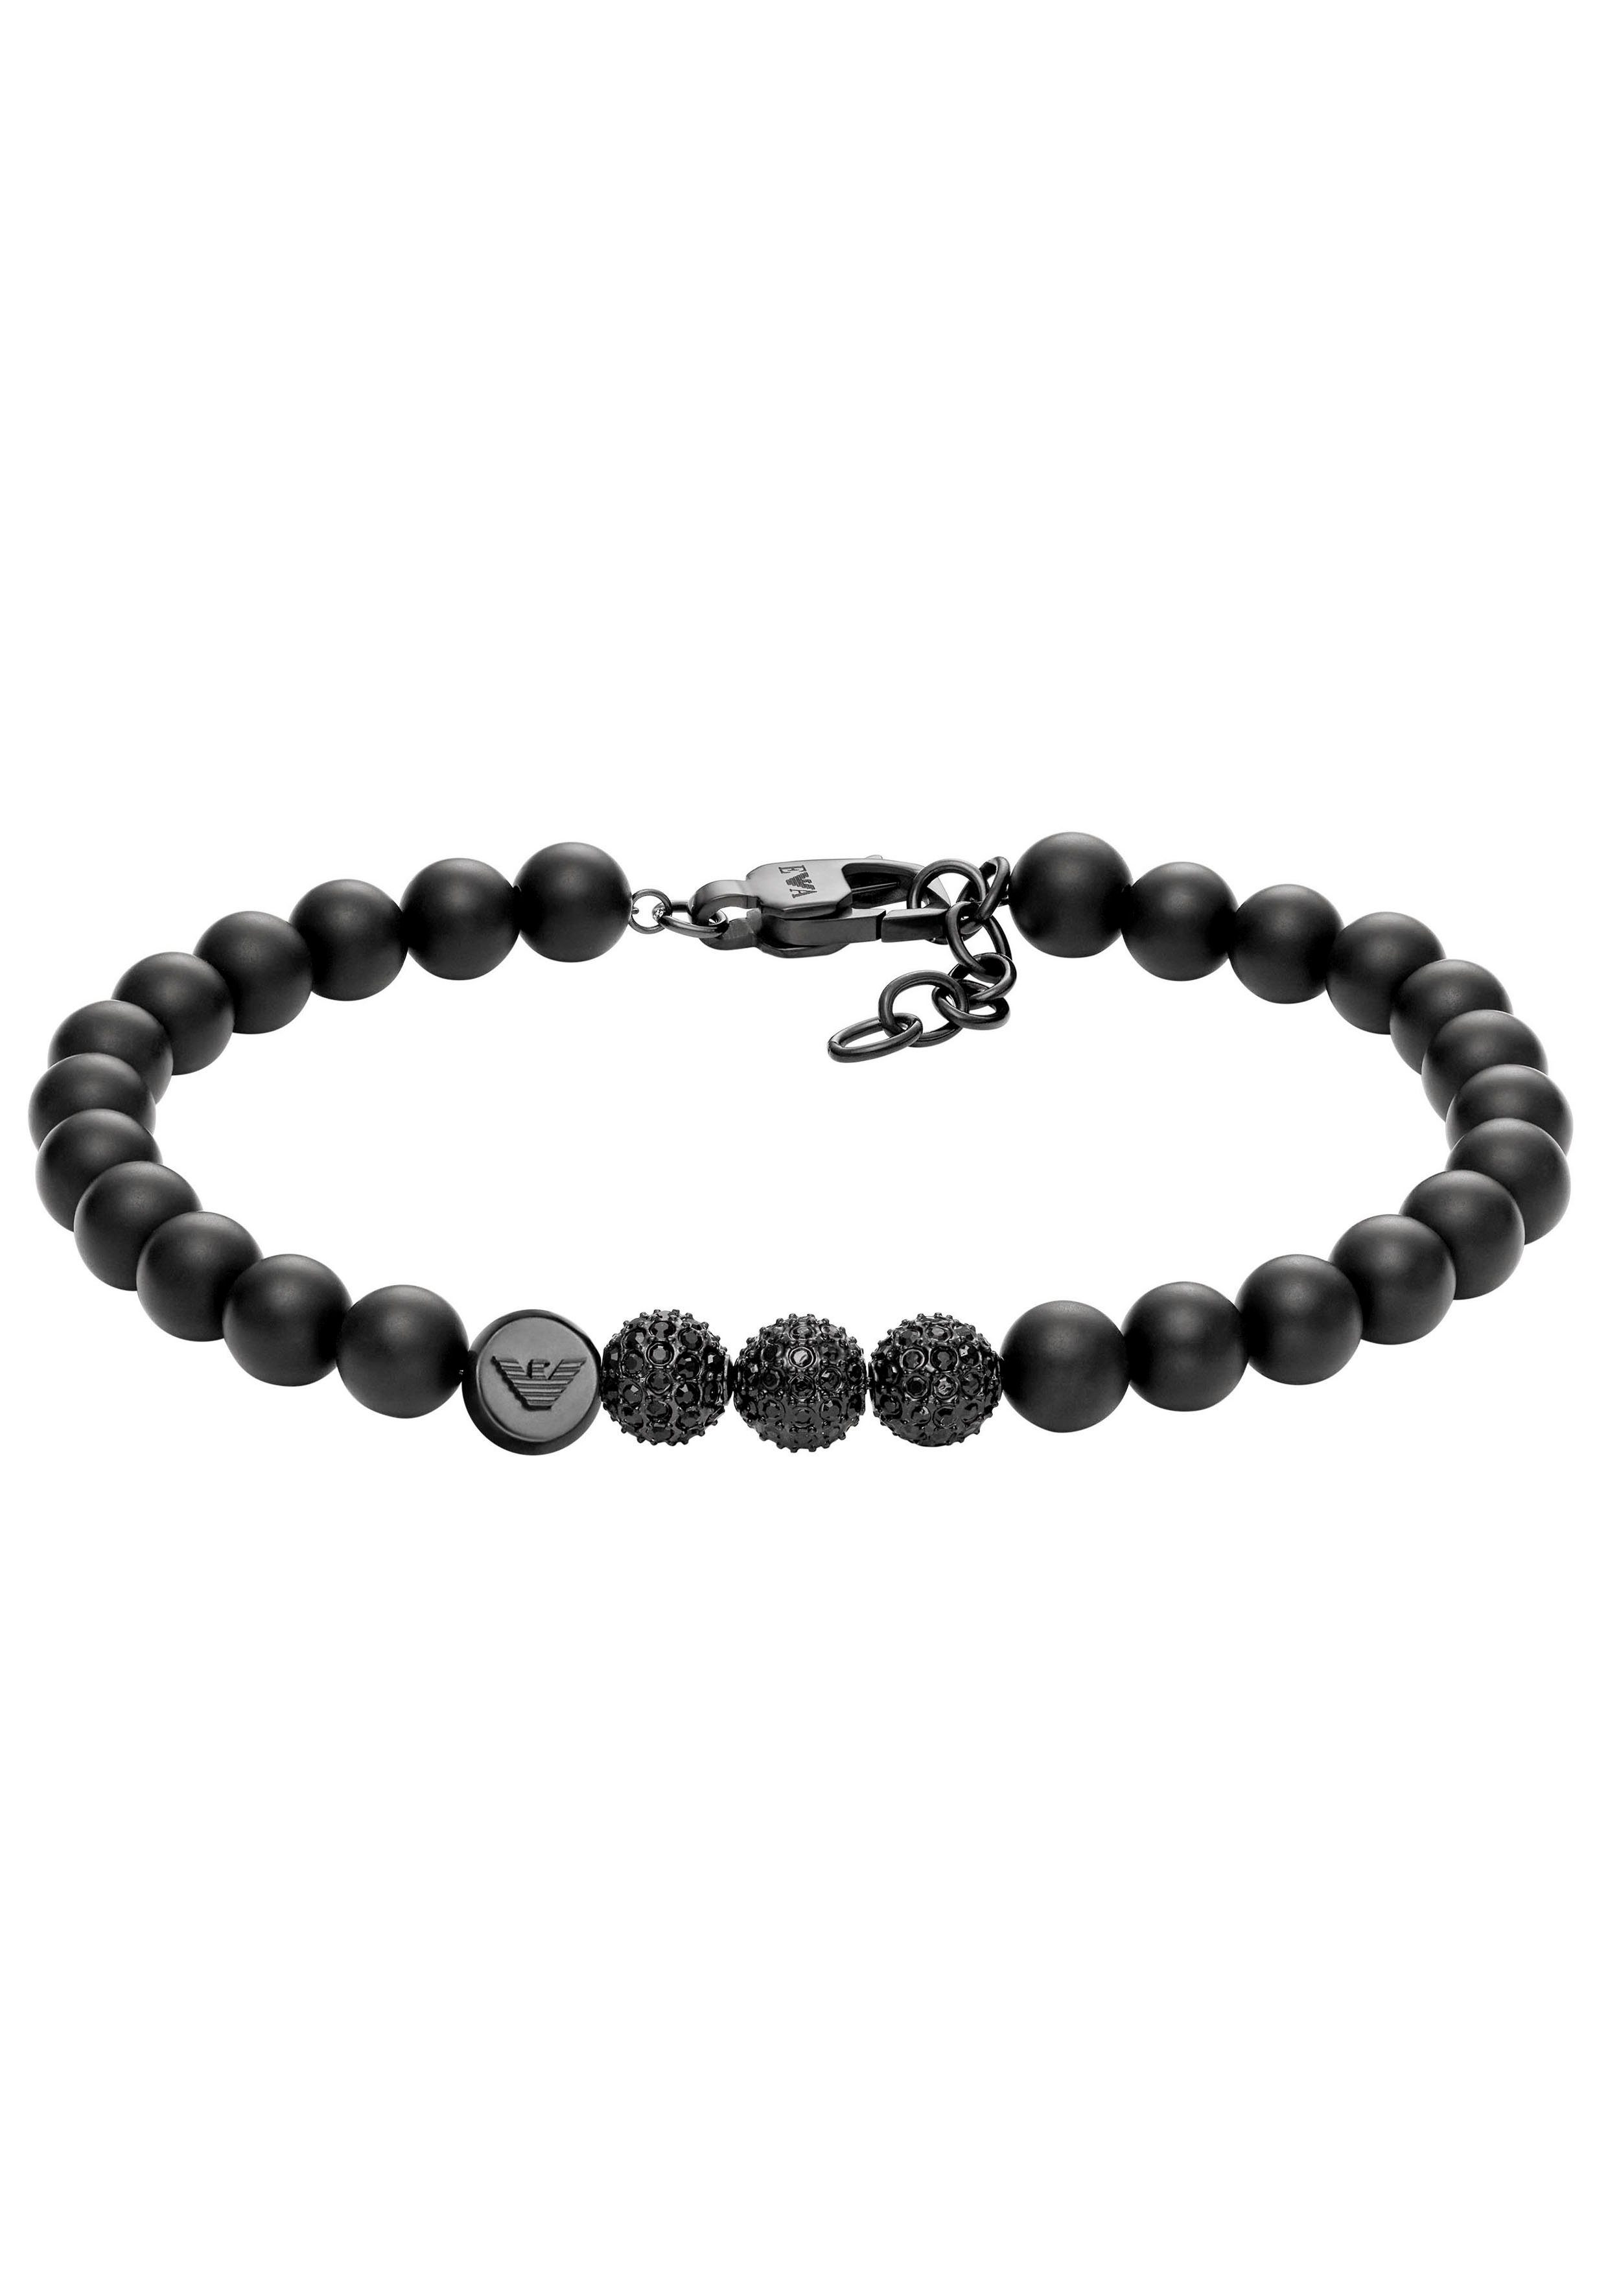 Onyx AND Emporio PAVE, TREND, BEADS ICONIC EGS3030001, mit Armband Gagat Armani und